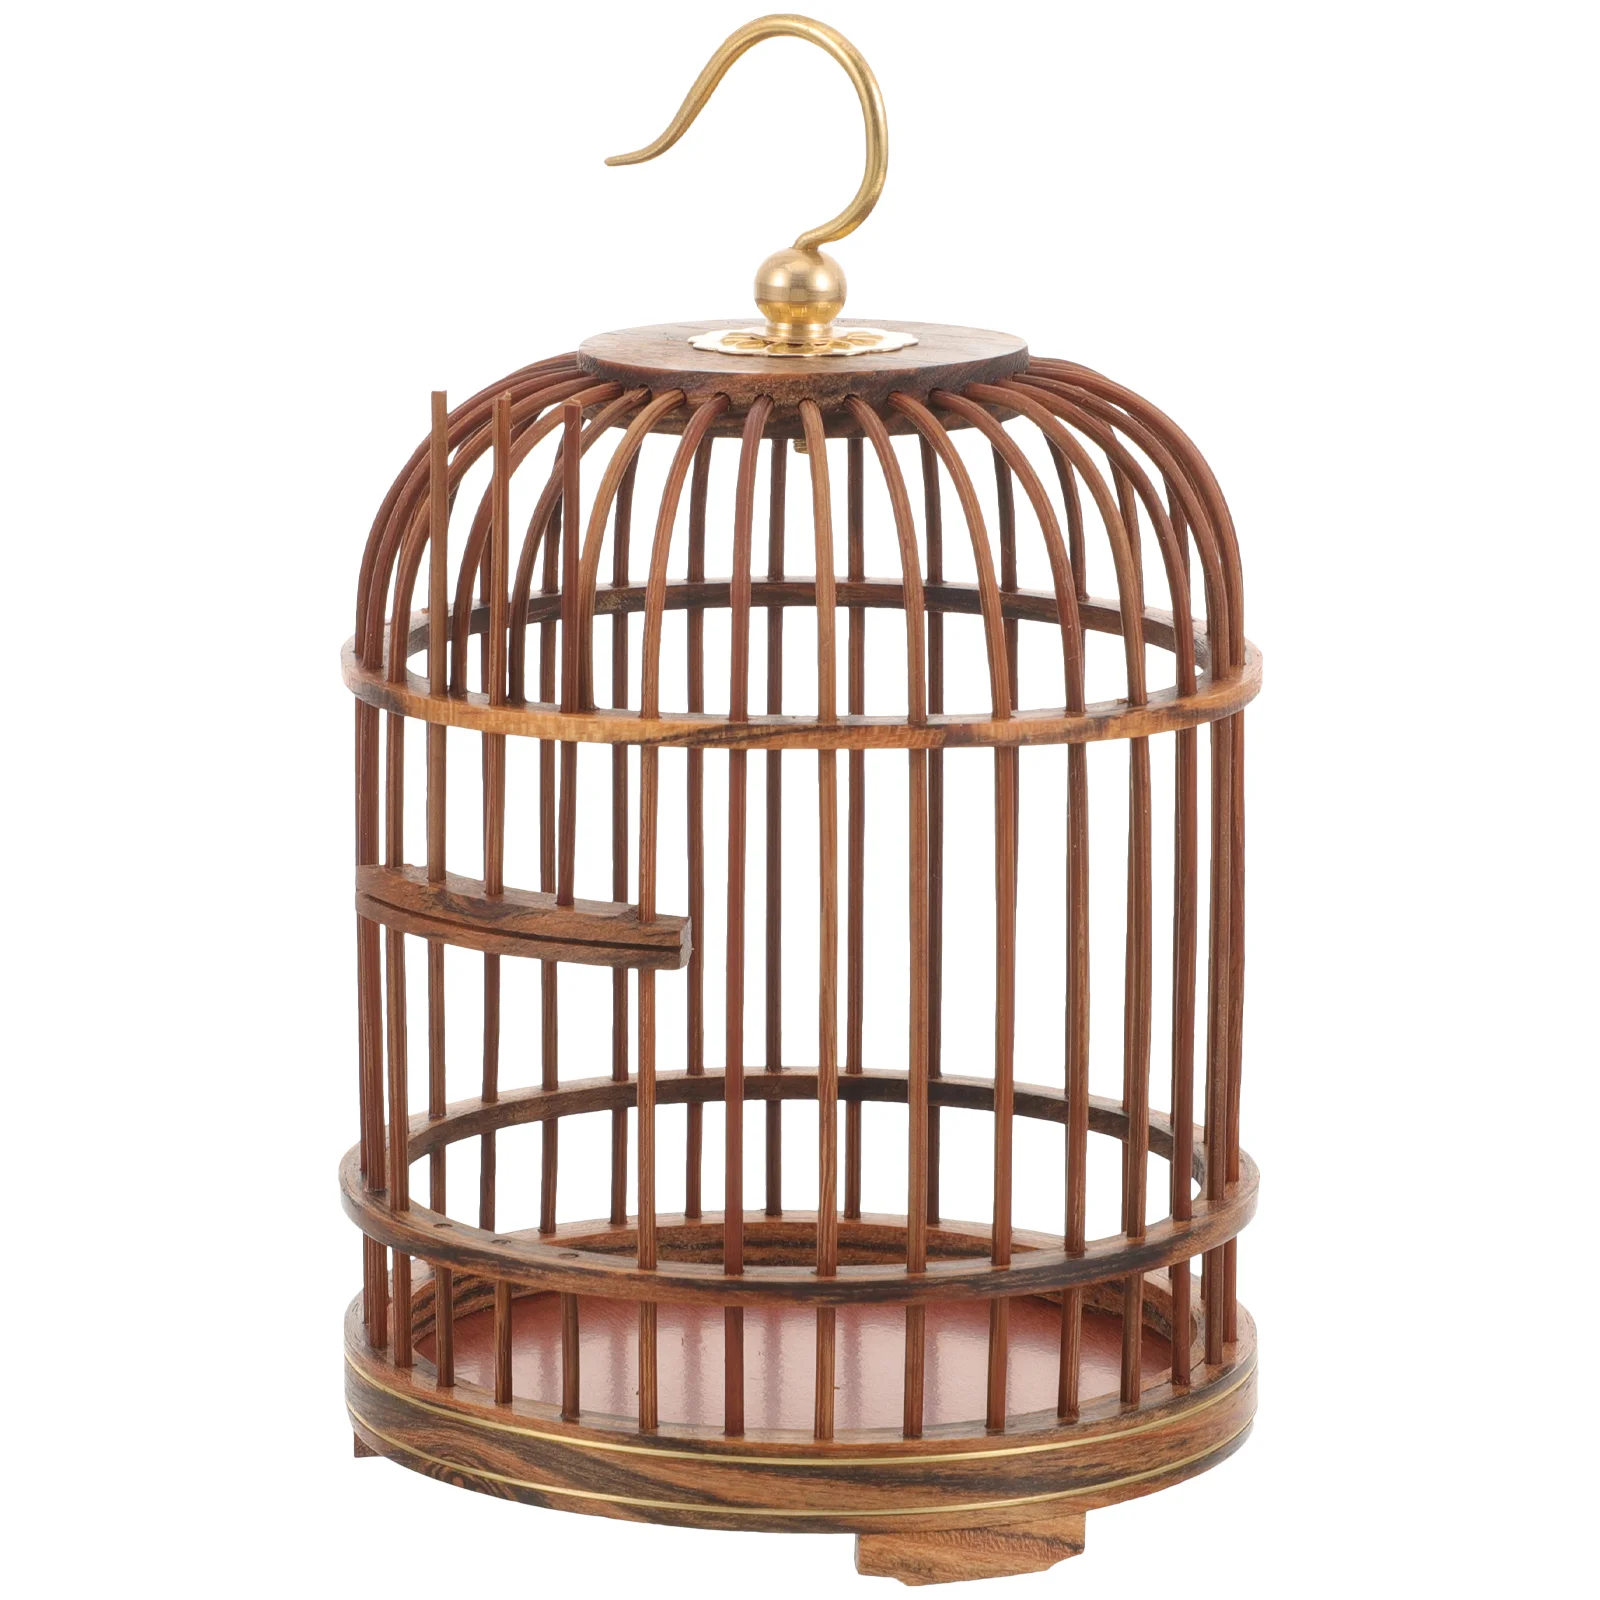 

Pet Cage Outdoor Decor Wooden Bird Nest Inflatable Birdcage Metal Decorative Vintage Hanging Insect Birdcages Ornament